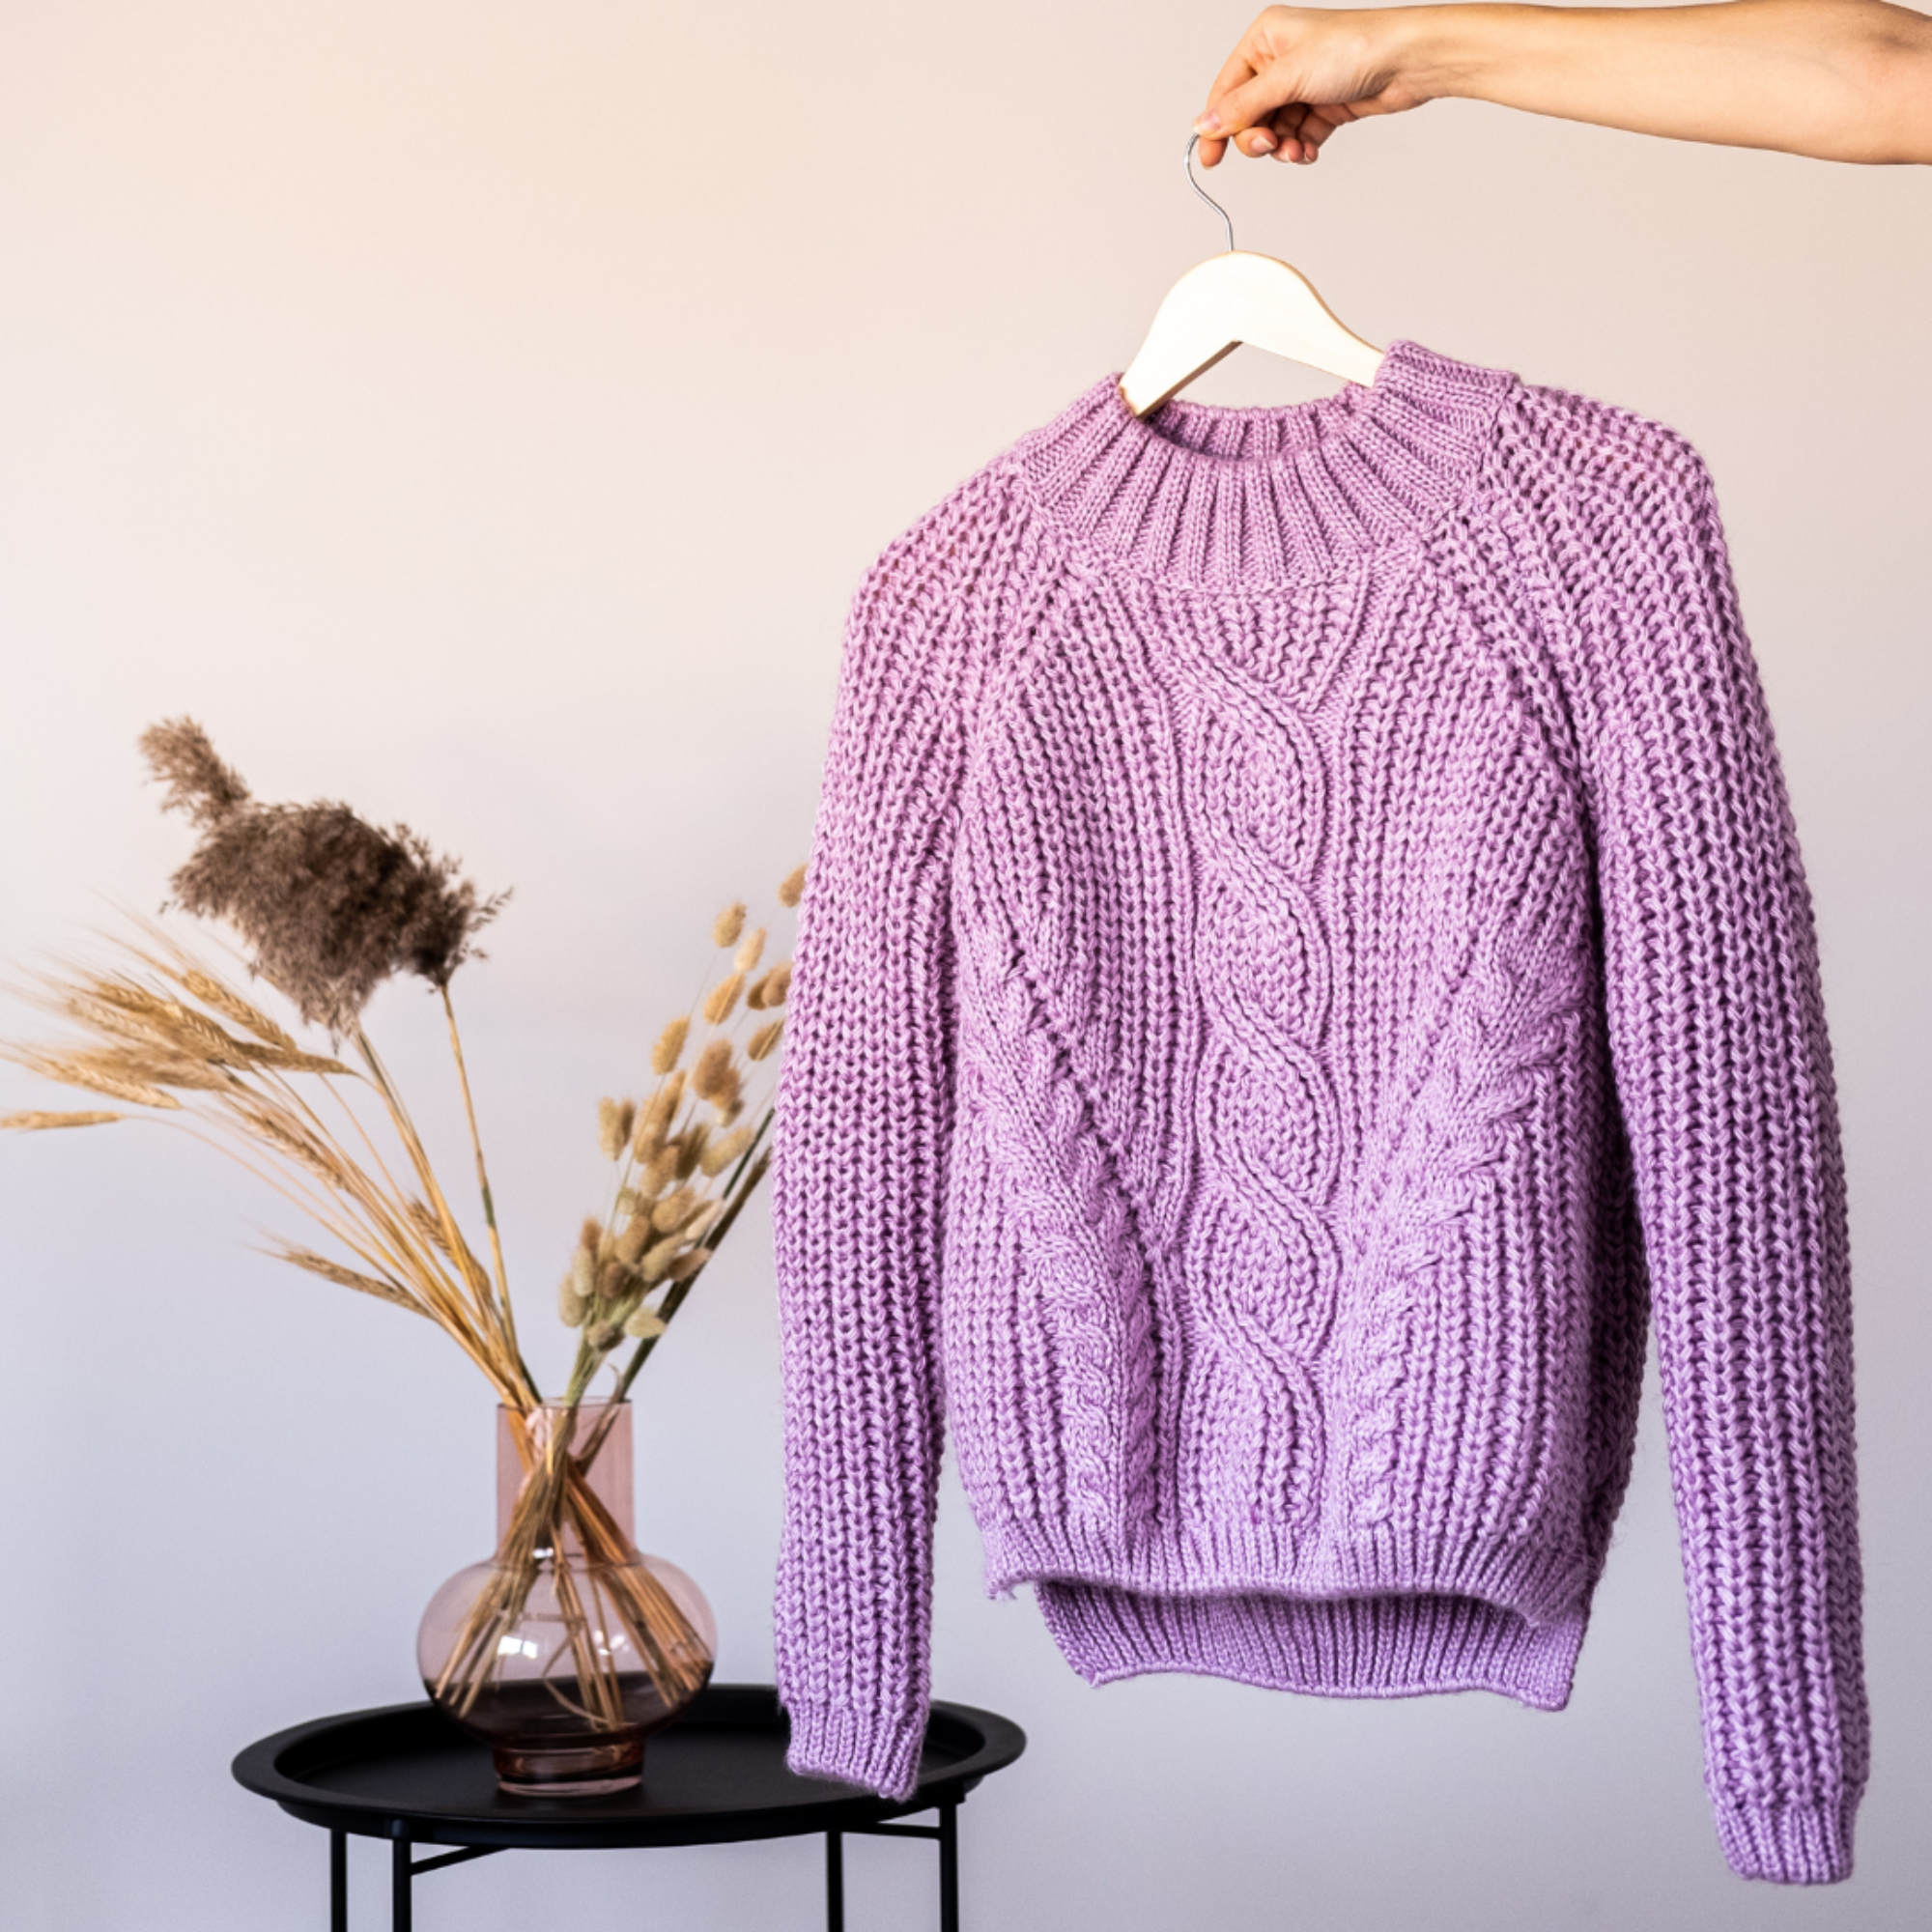 Picture of a pink sweater on a hanger